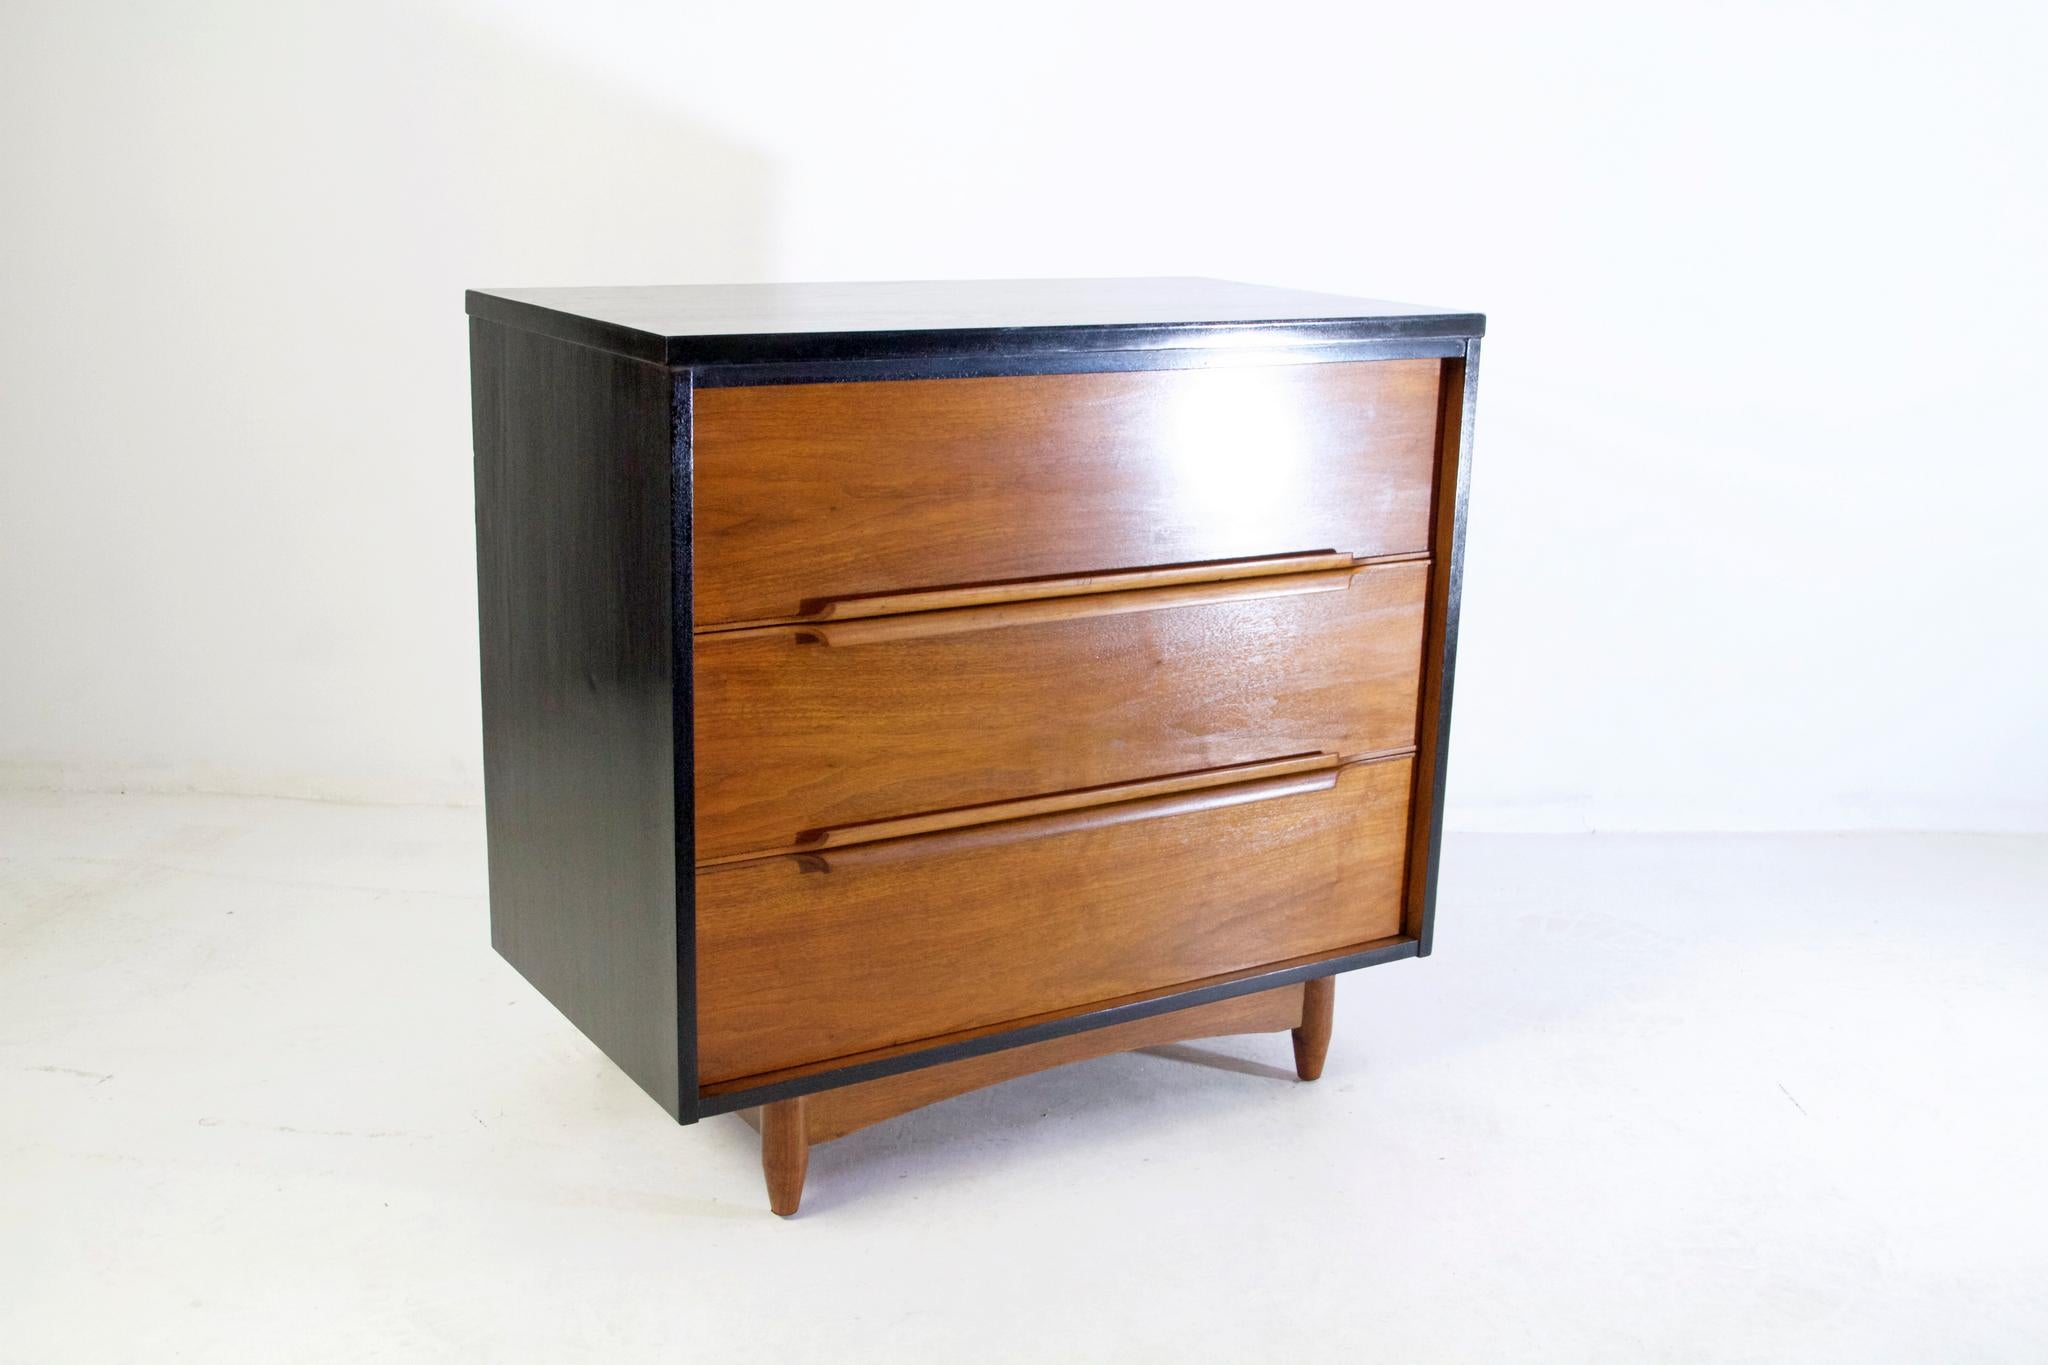 An elegant dresser in teak with an ebonized frame. It has four spacious drawers with handles that are incorporated curved handles. In very nice restored condition and of high quality production.